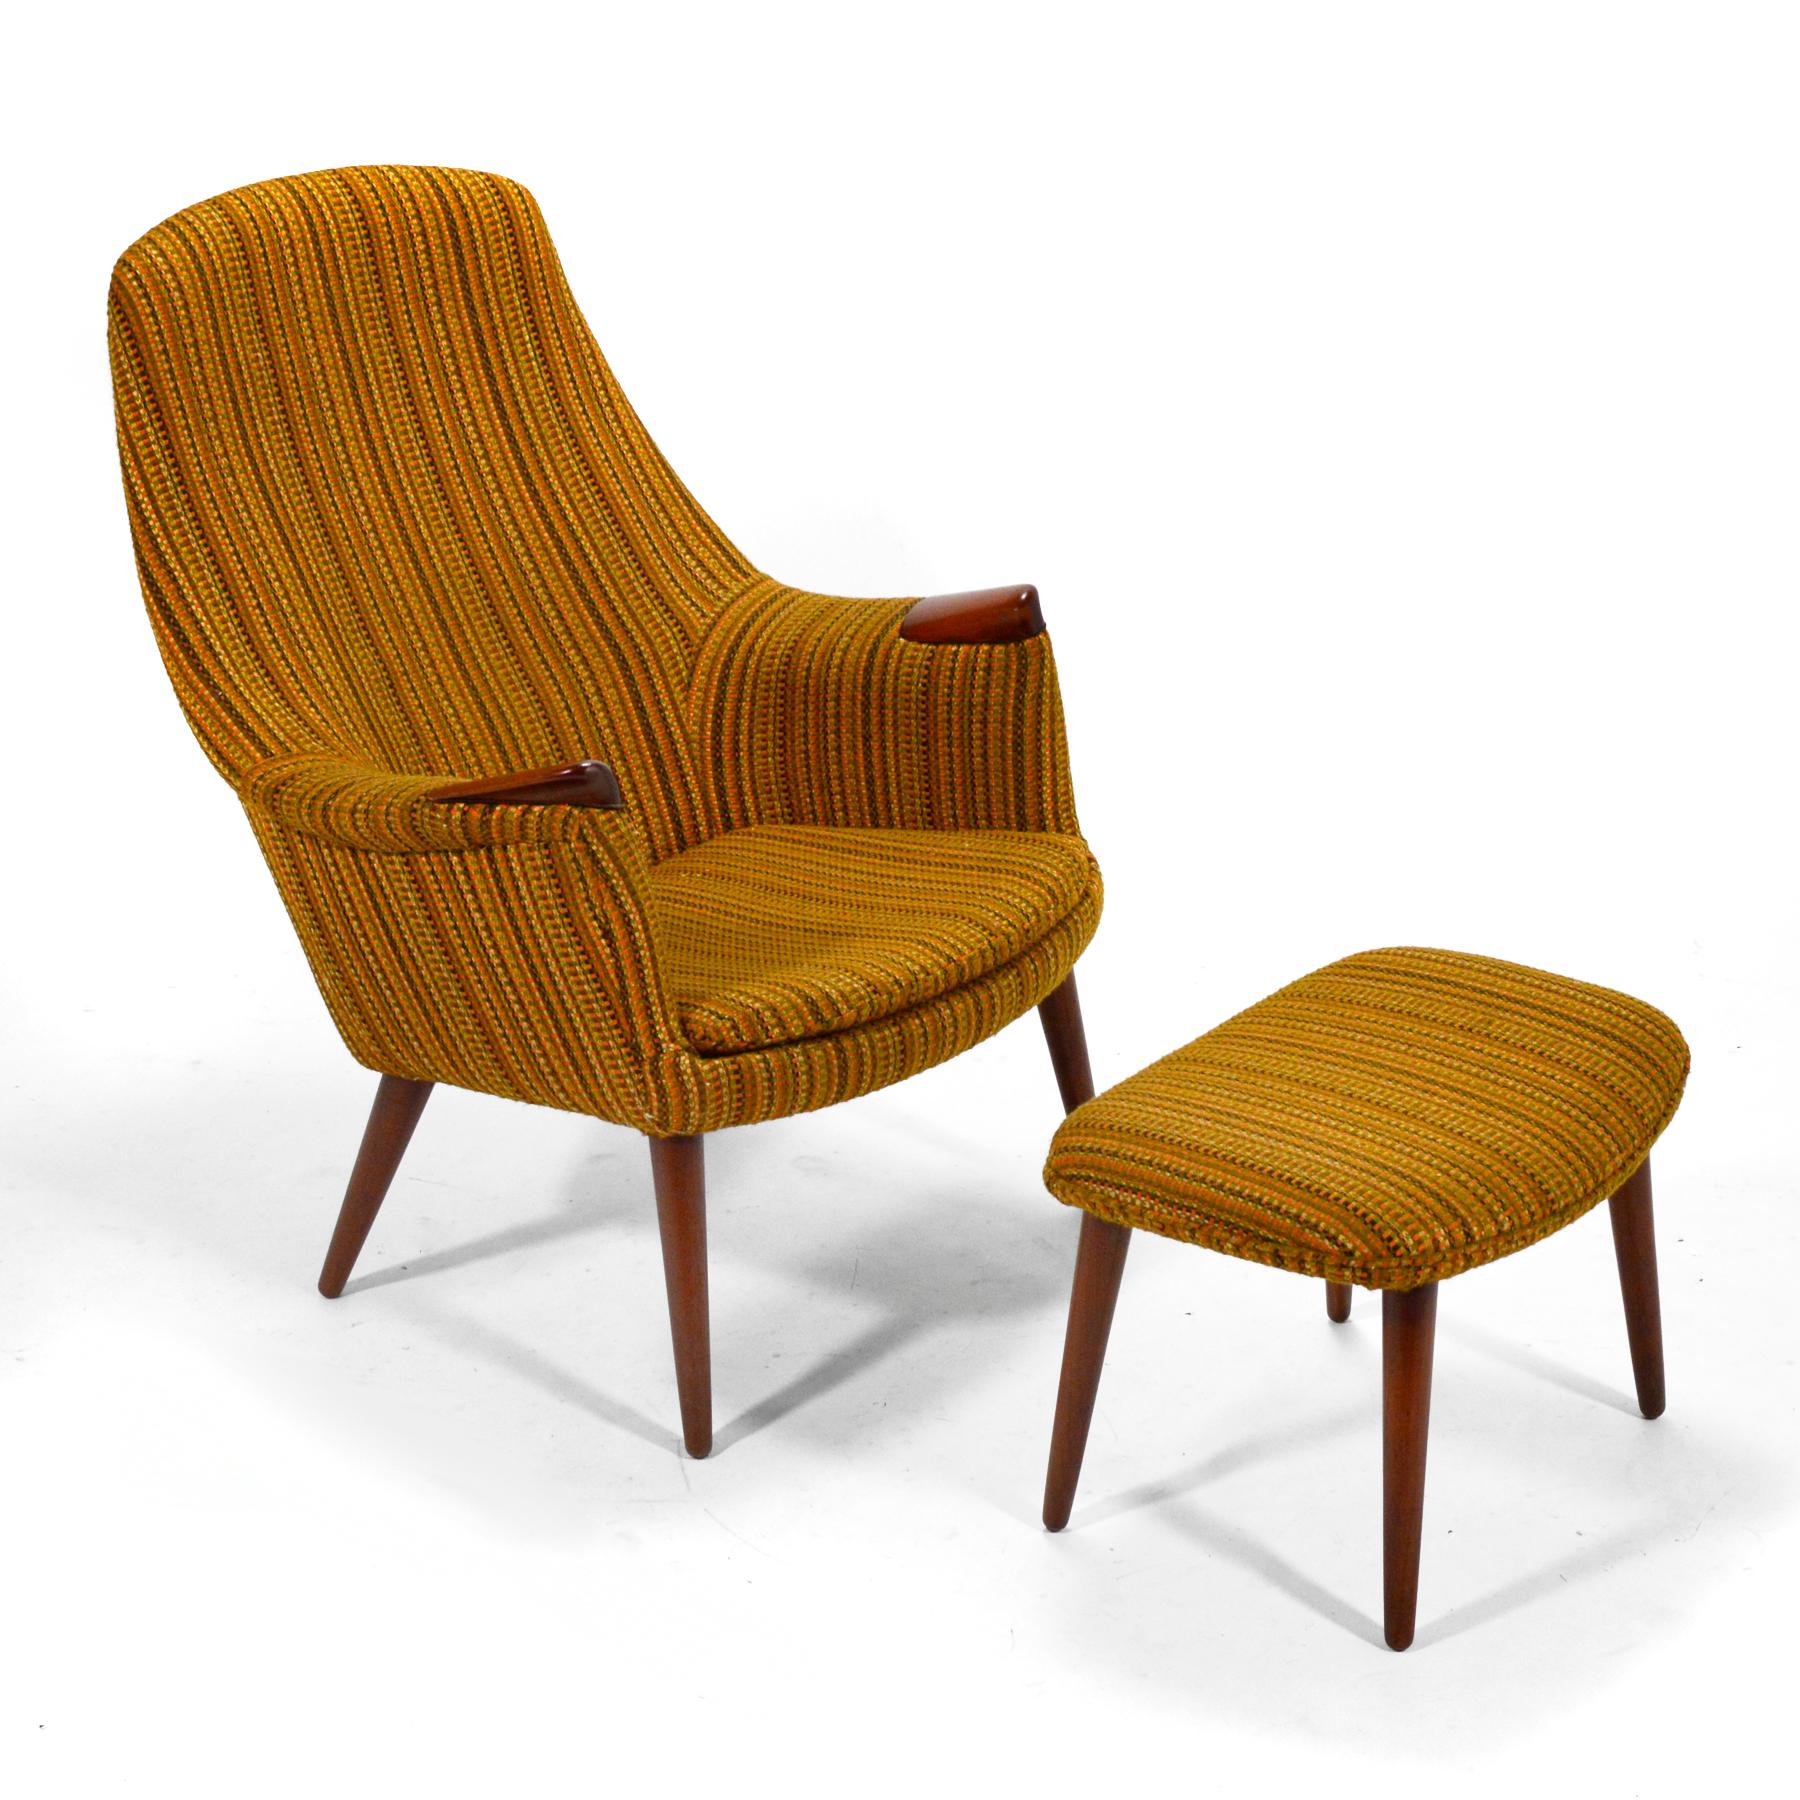 This striking lounge chair and ottoman designed by Gerhard Berg for LK Hjelle in Norway shares qualities with some Hans Wegner designs. It has an upholstered body with exposed teak hand-rests and is supported by elegant tapered teak legs. With sexy